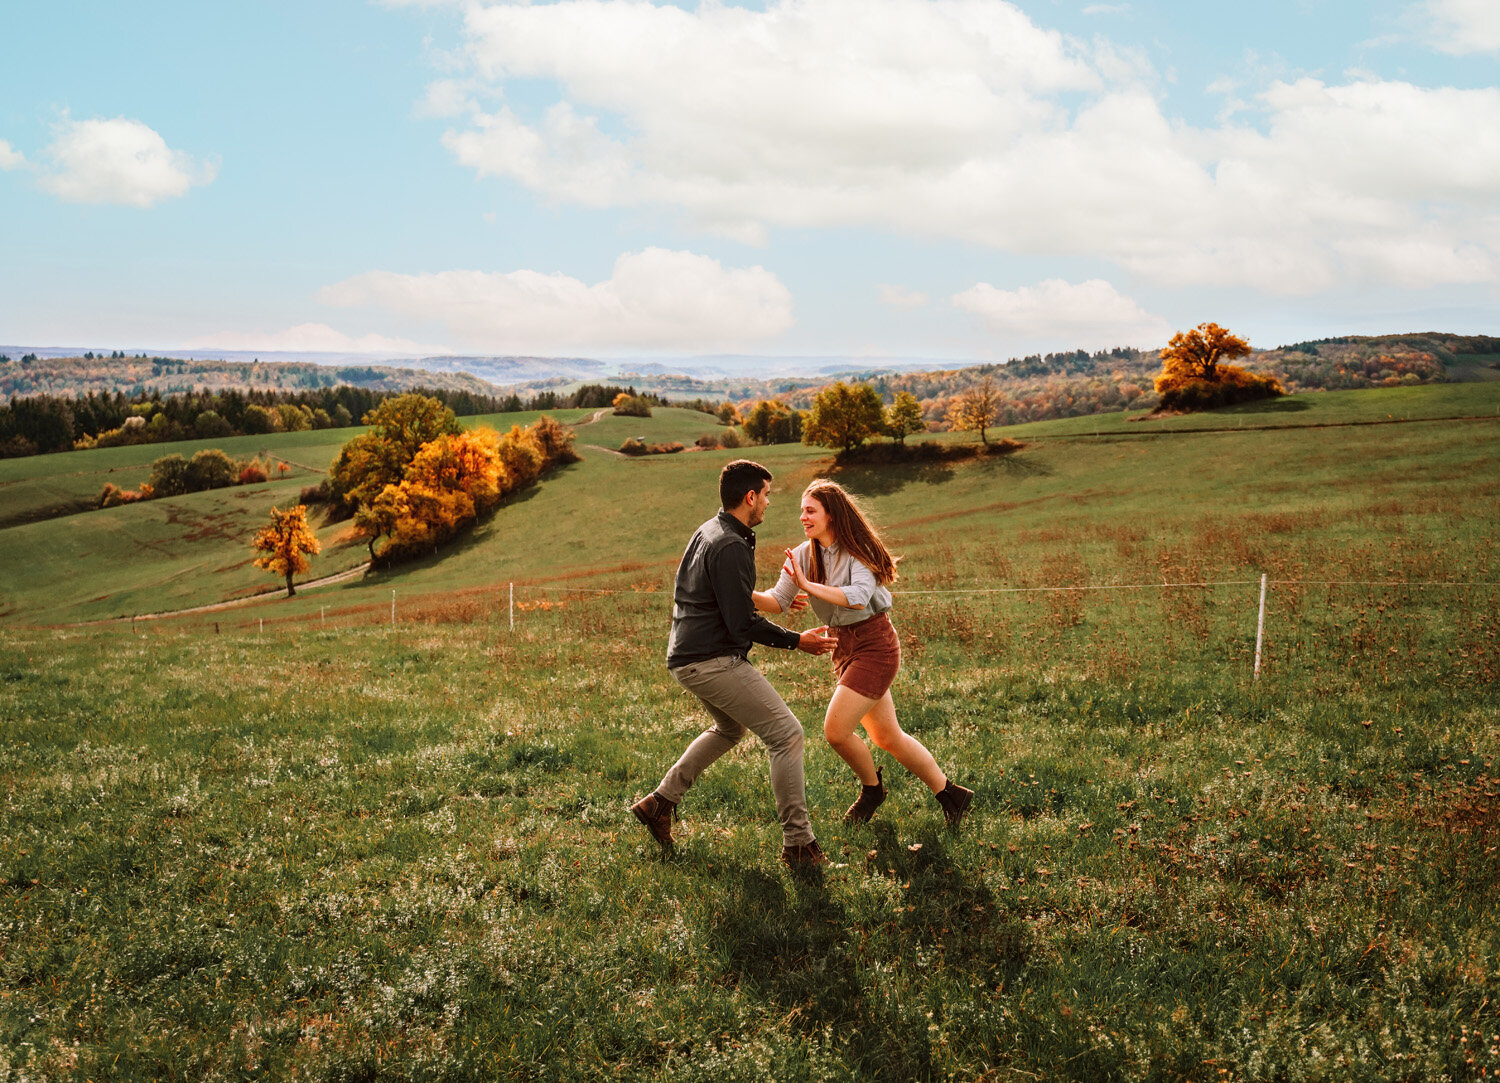  Young couple with new puppy dog enjoying the german country side in fall season with colorful leaves and rolling hills in Schweisweiler near Sembach air base. Photography by kmc engagement and family photographer Sarah Havens, Germany 